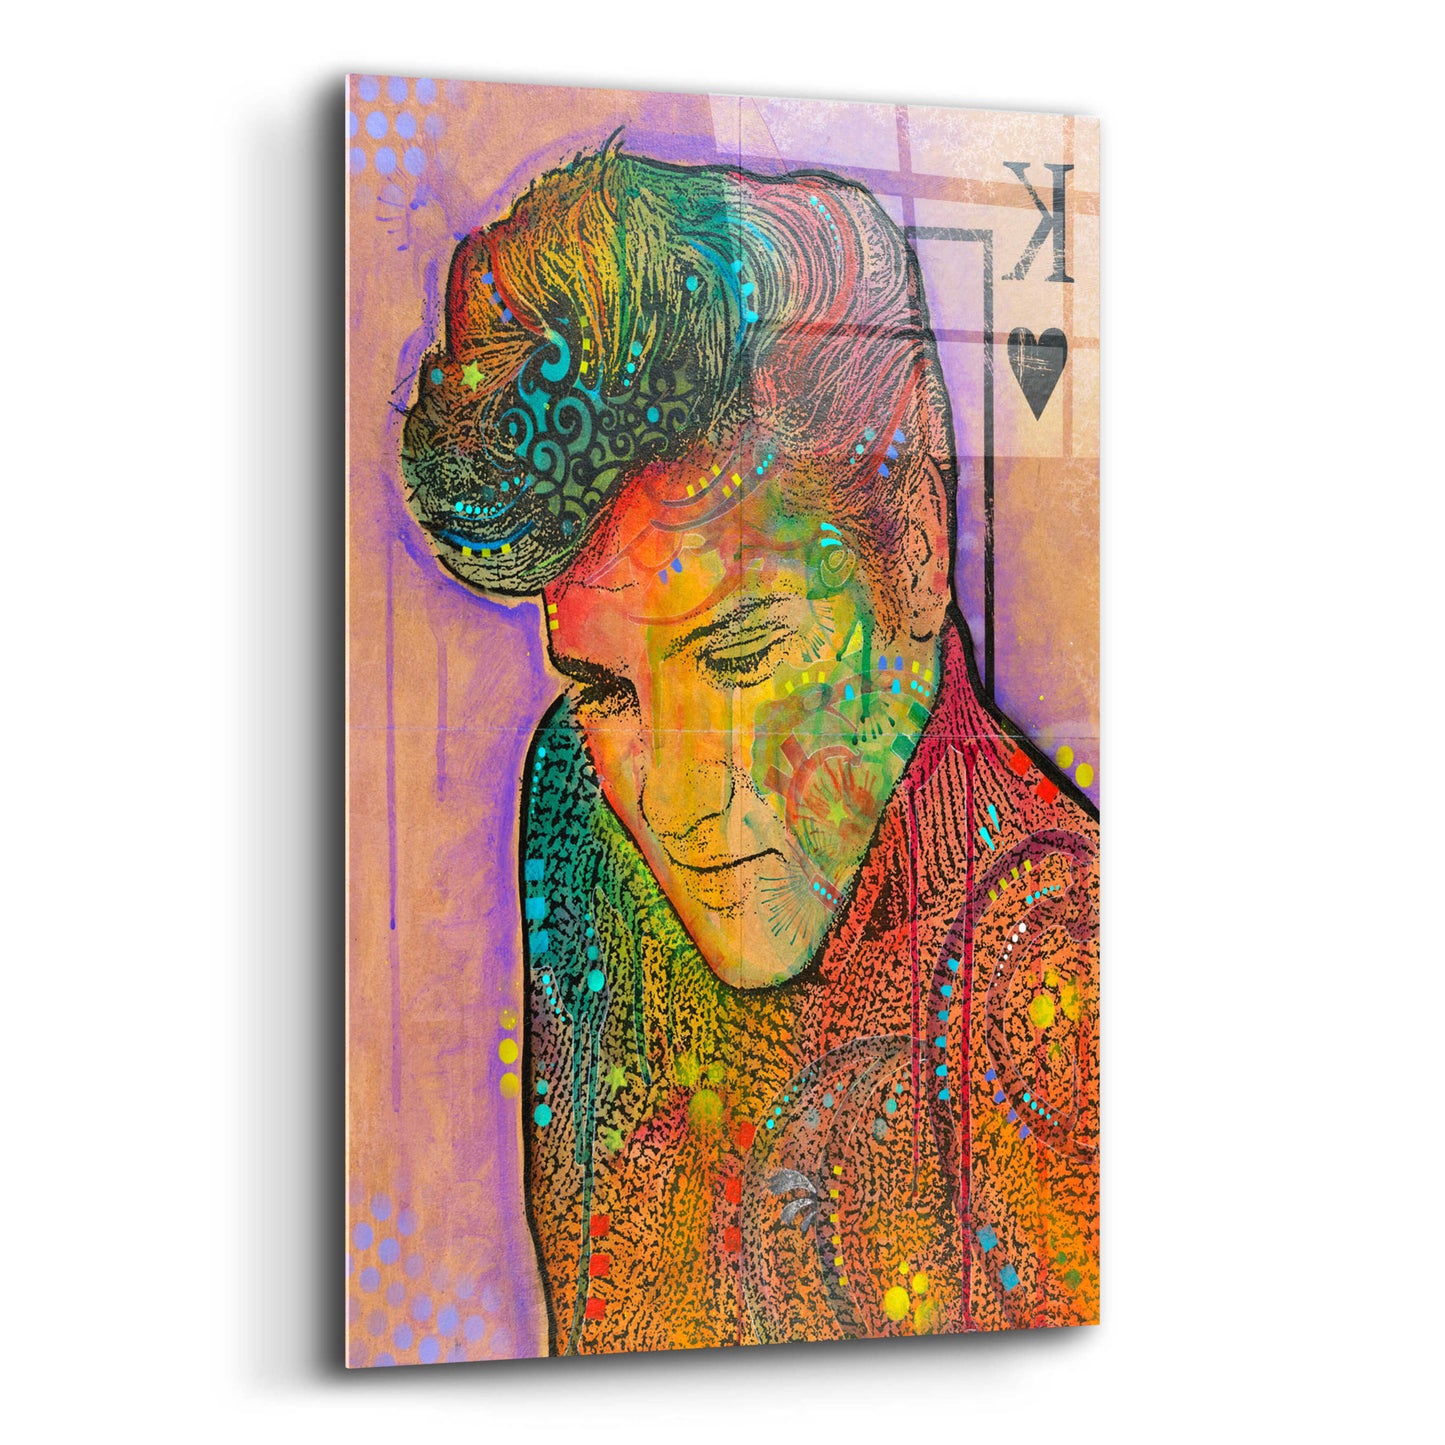 Epic Art 'Elvis - King of Hearts' by Dean Russo, Acrylic Glass Wall Art,12x16